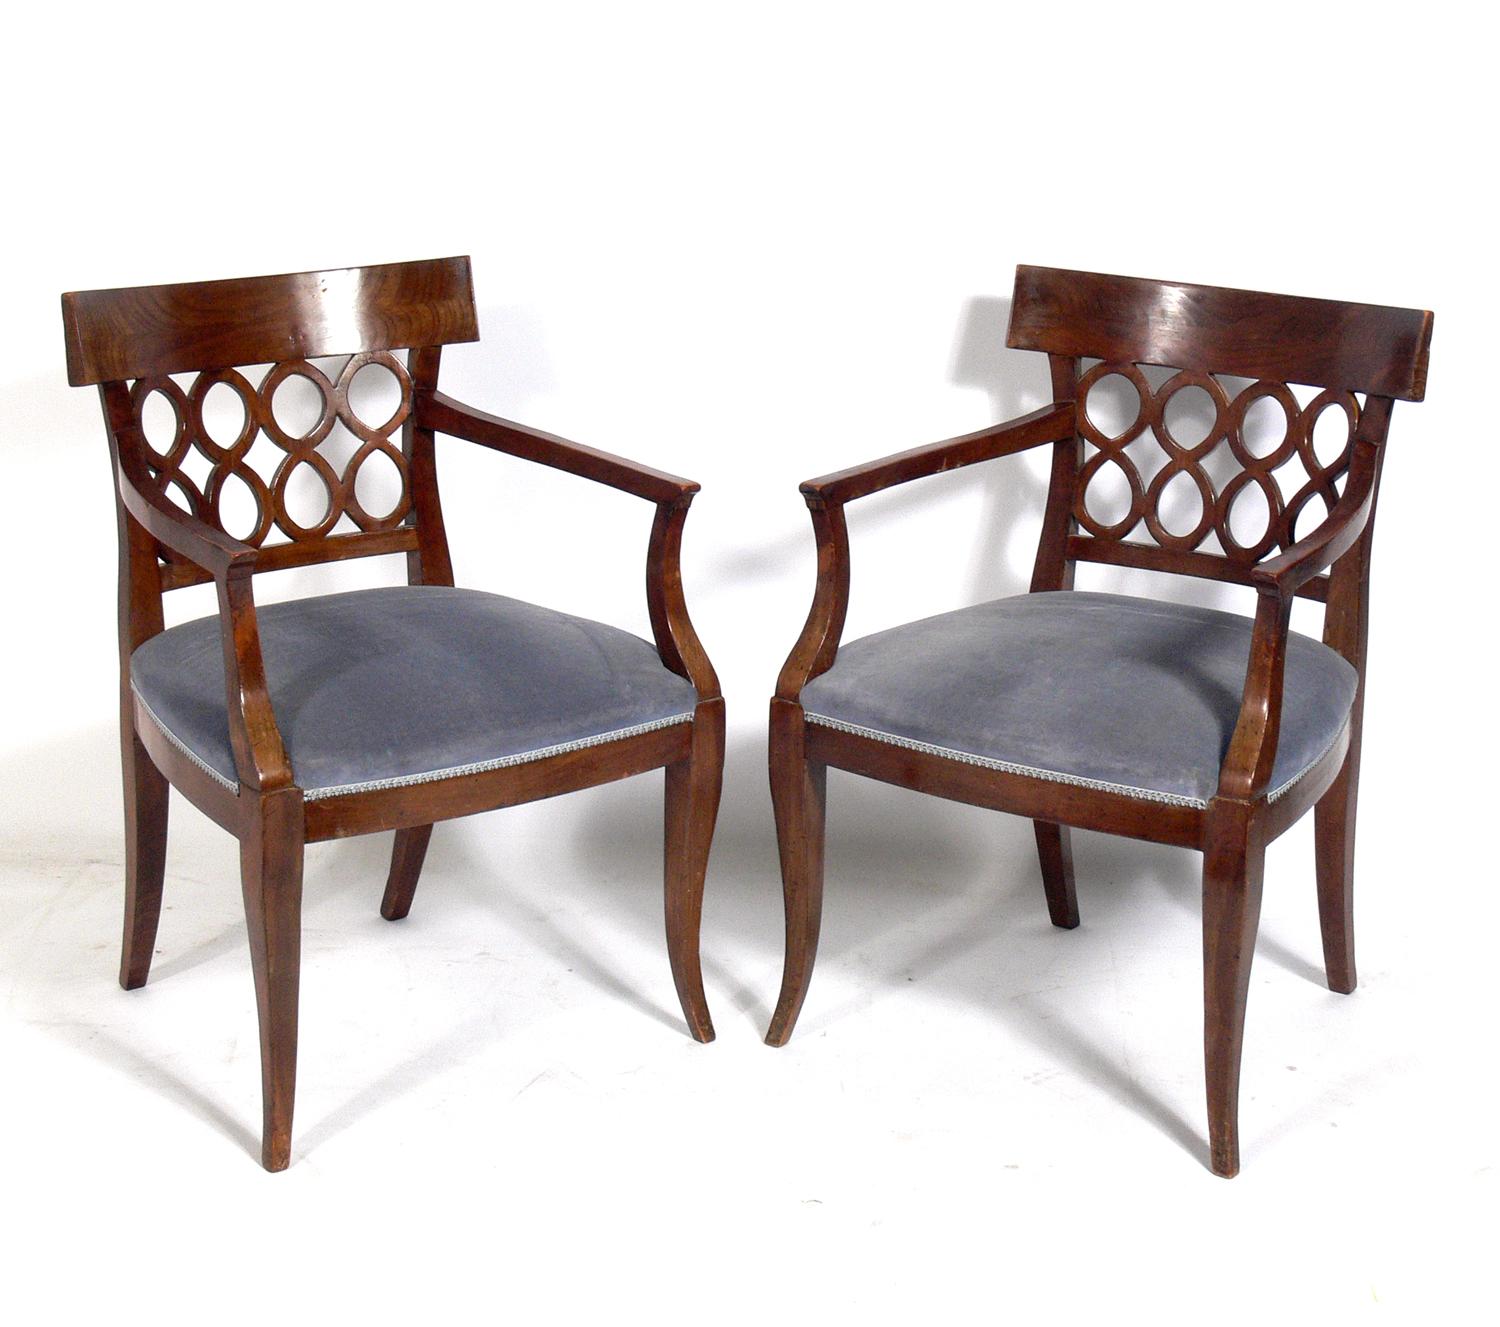 Pair of curvaceous Italian fret back chairs, Italy, circa 1950s. The seats are currently being reupholstered and can be completed in your fabric at no additional charge. The price noted below includes reupholstery in your fabric.